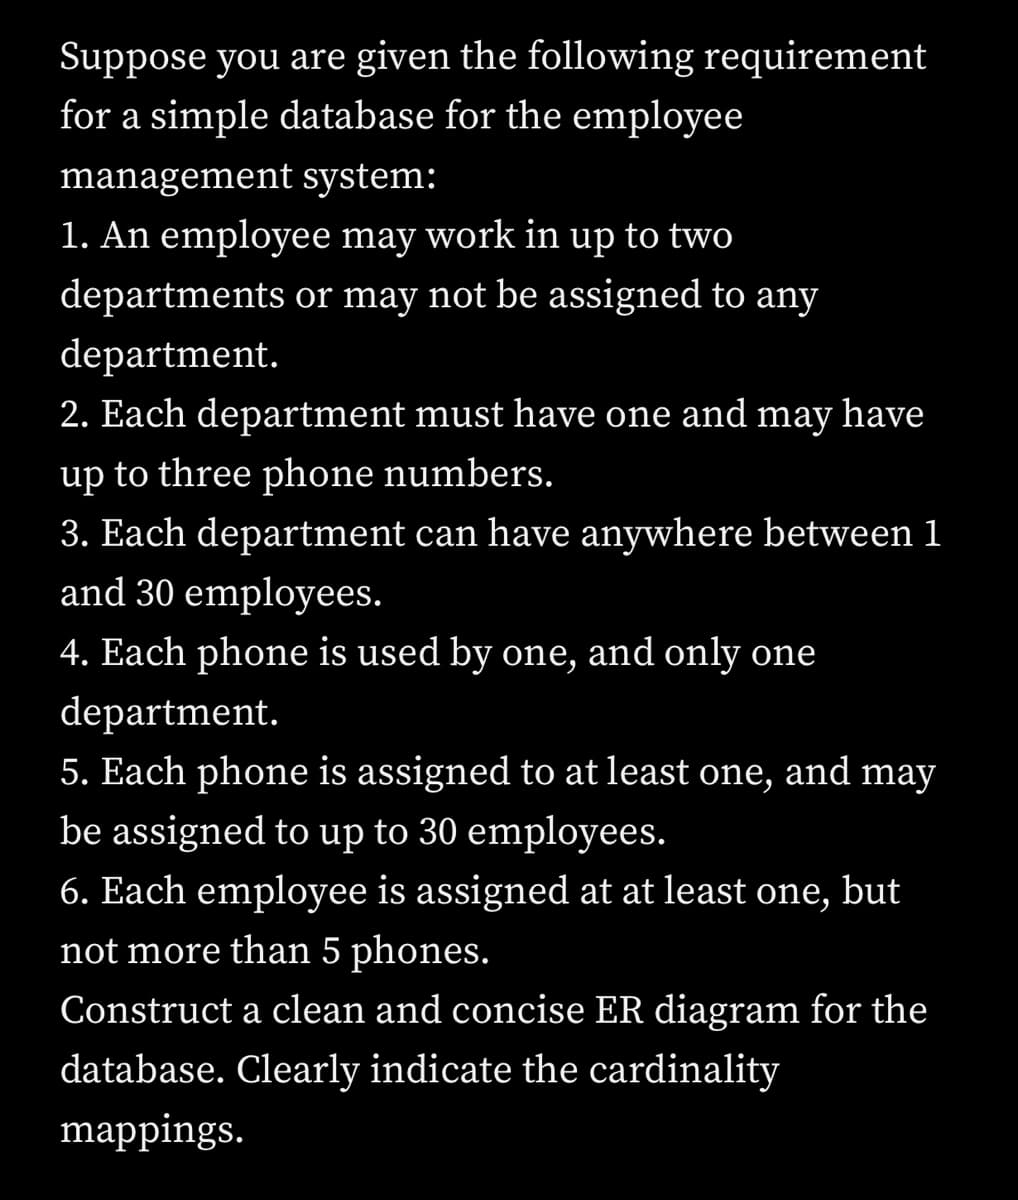 Suppose you are given the following requirement
for a simple database for the employee
management system:
1. An employee may work in up to two
departments or may not be assigned to any
department.
2. Each department must have one and may have
up to three phone numbers.
3. Each department can have anywhere between 1
and 30 employees.
4. Each phone is used by one, and only one
department.
5. Each phone is assigned to at least one, and may
be assigned to up to 30 employees.
6. Each employee is assigned at at least one, but
not more than 5 phones.
Construct a clean and concise ER diagram for the
database. Clearly indicate the cardinality
mappings.
